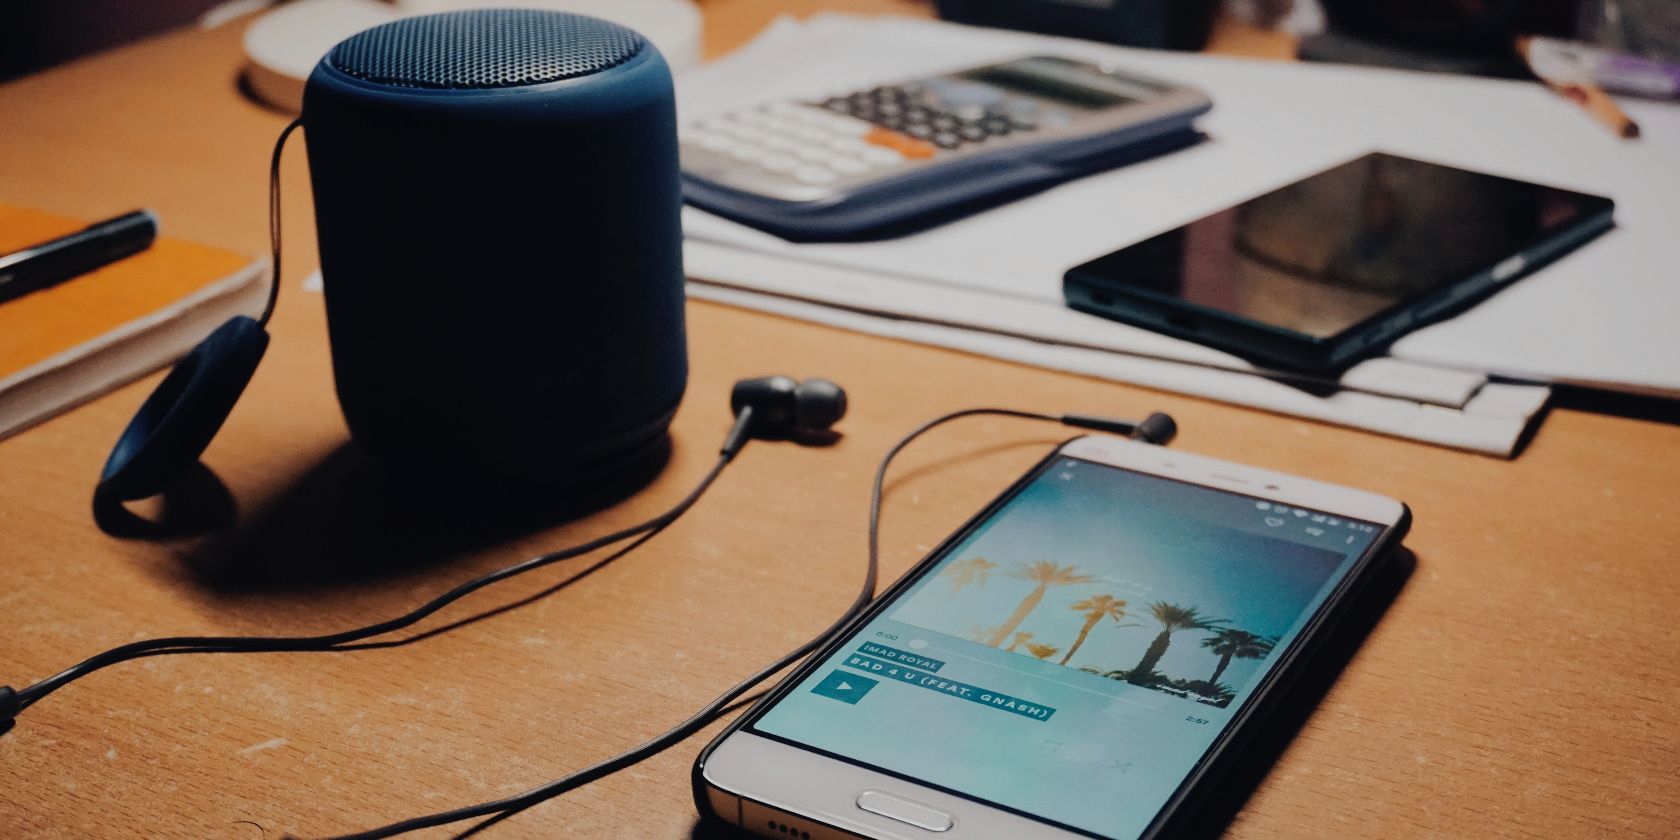 Samsung Phone and Bluetooth Speaker on a desk